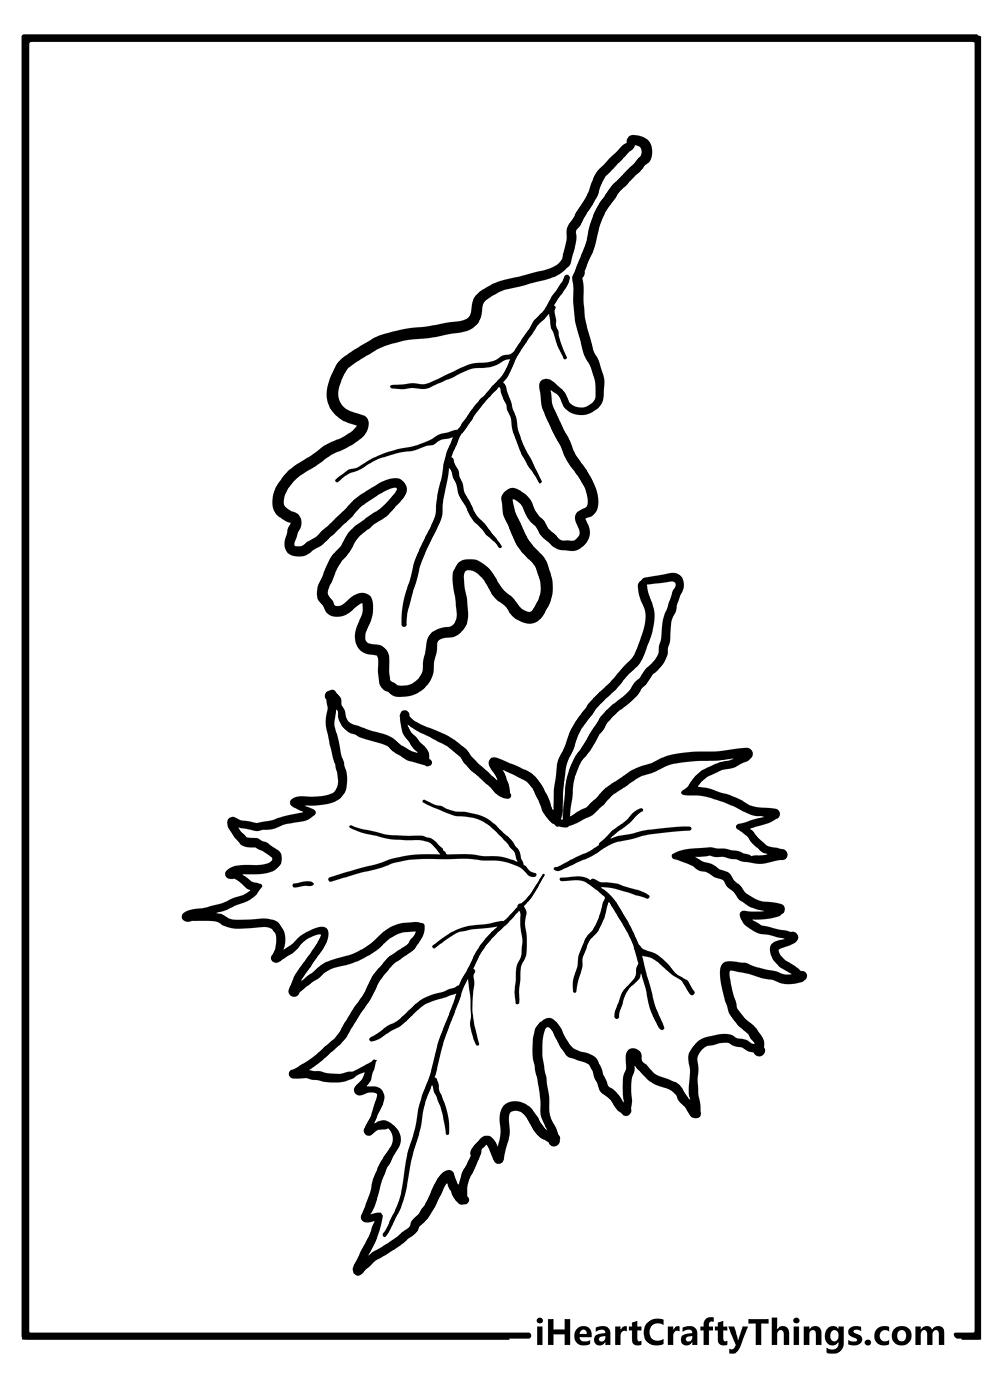 Fall Leaves Coloring Original Sheet for children free download